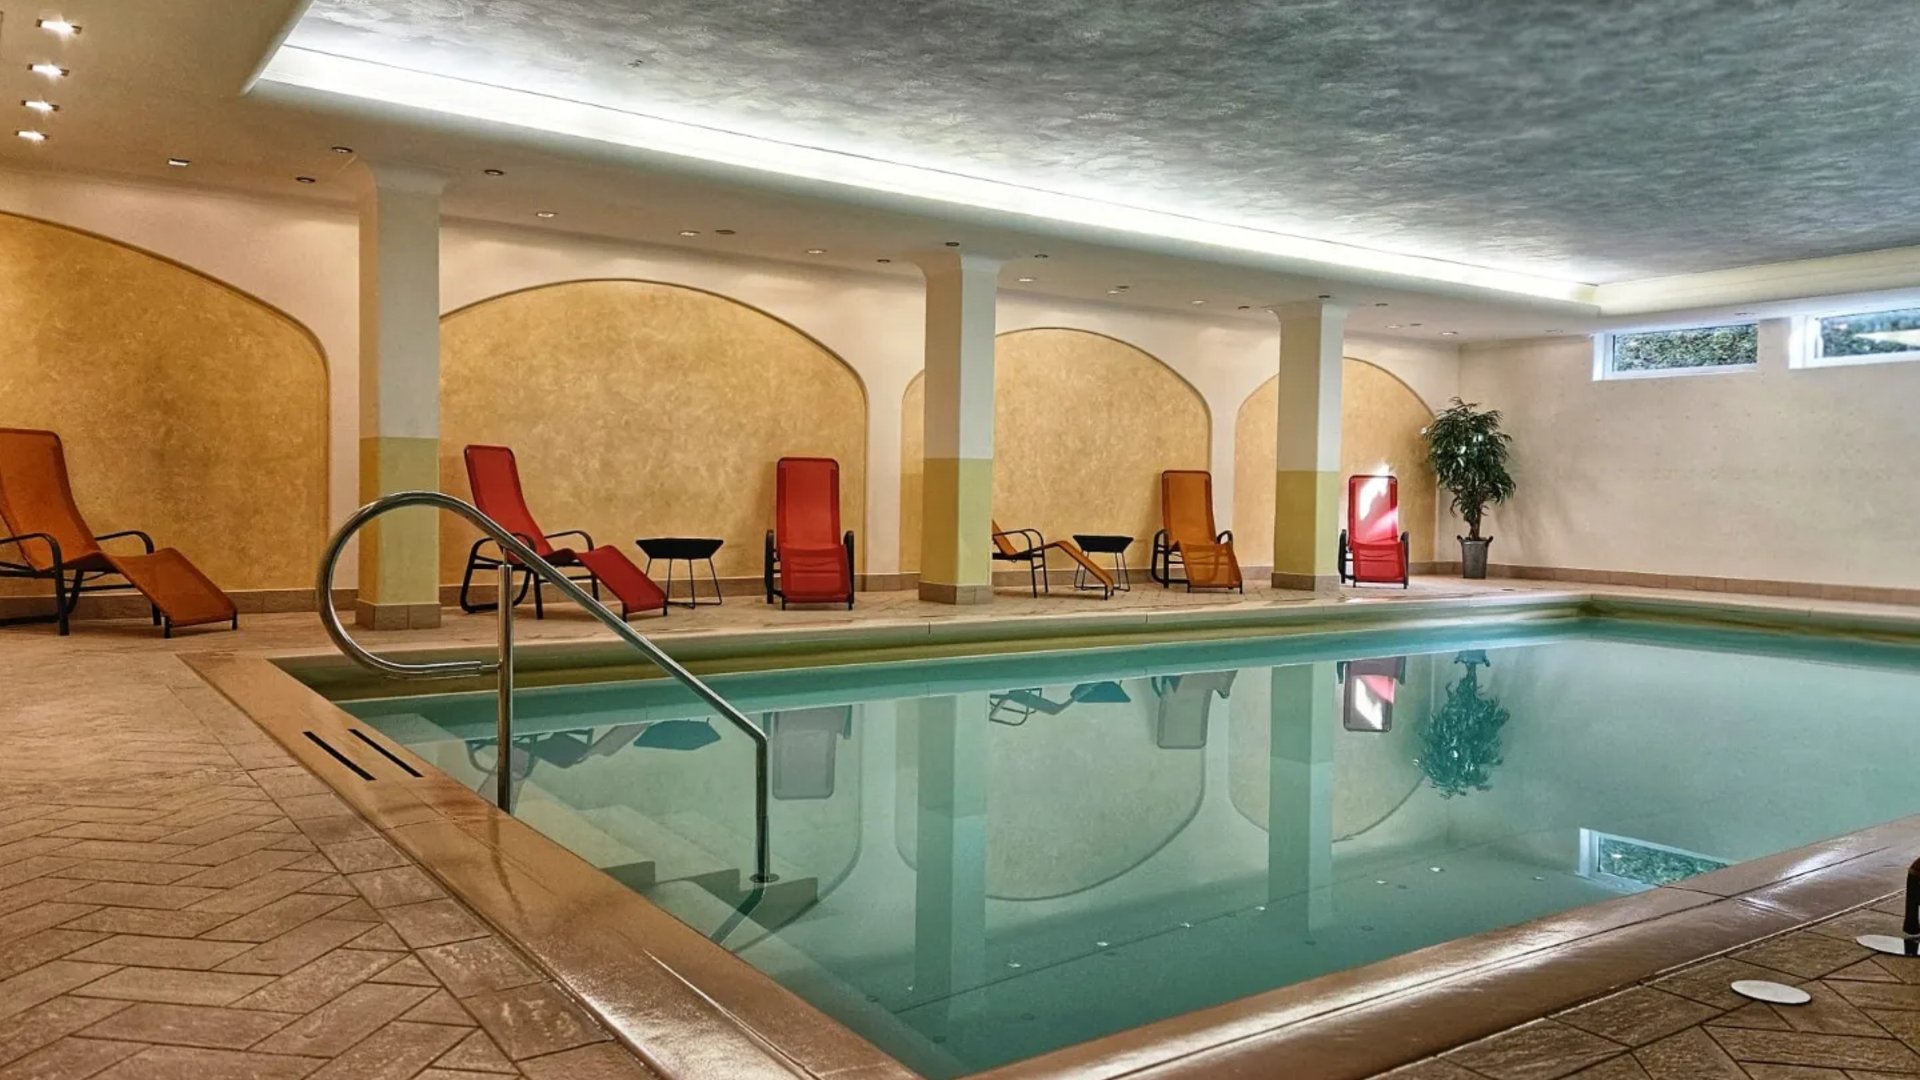 South Tyrol hotel with pool (3 stars): right here!